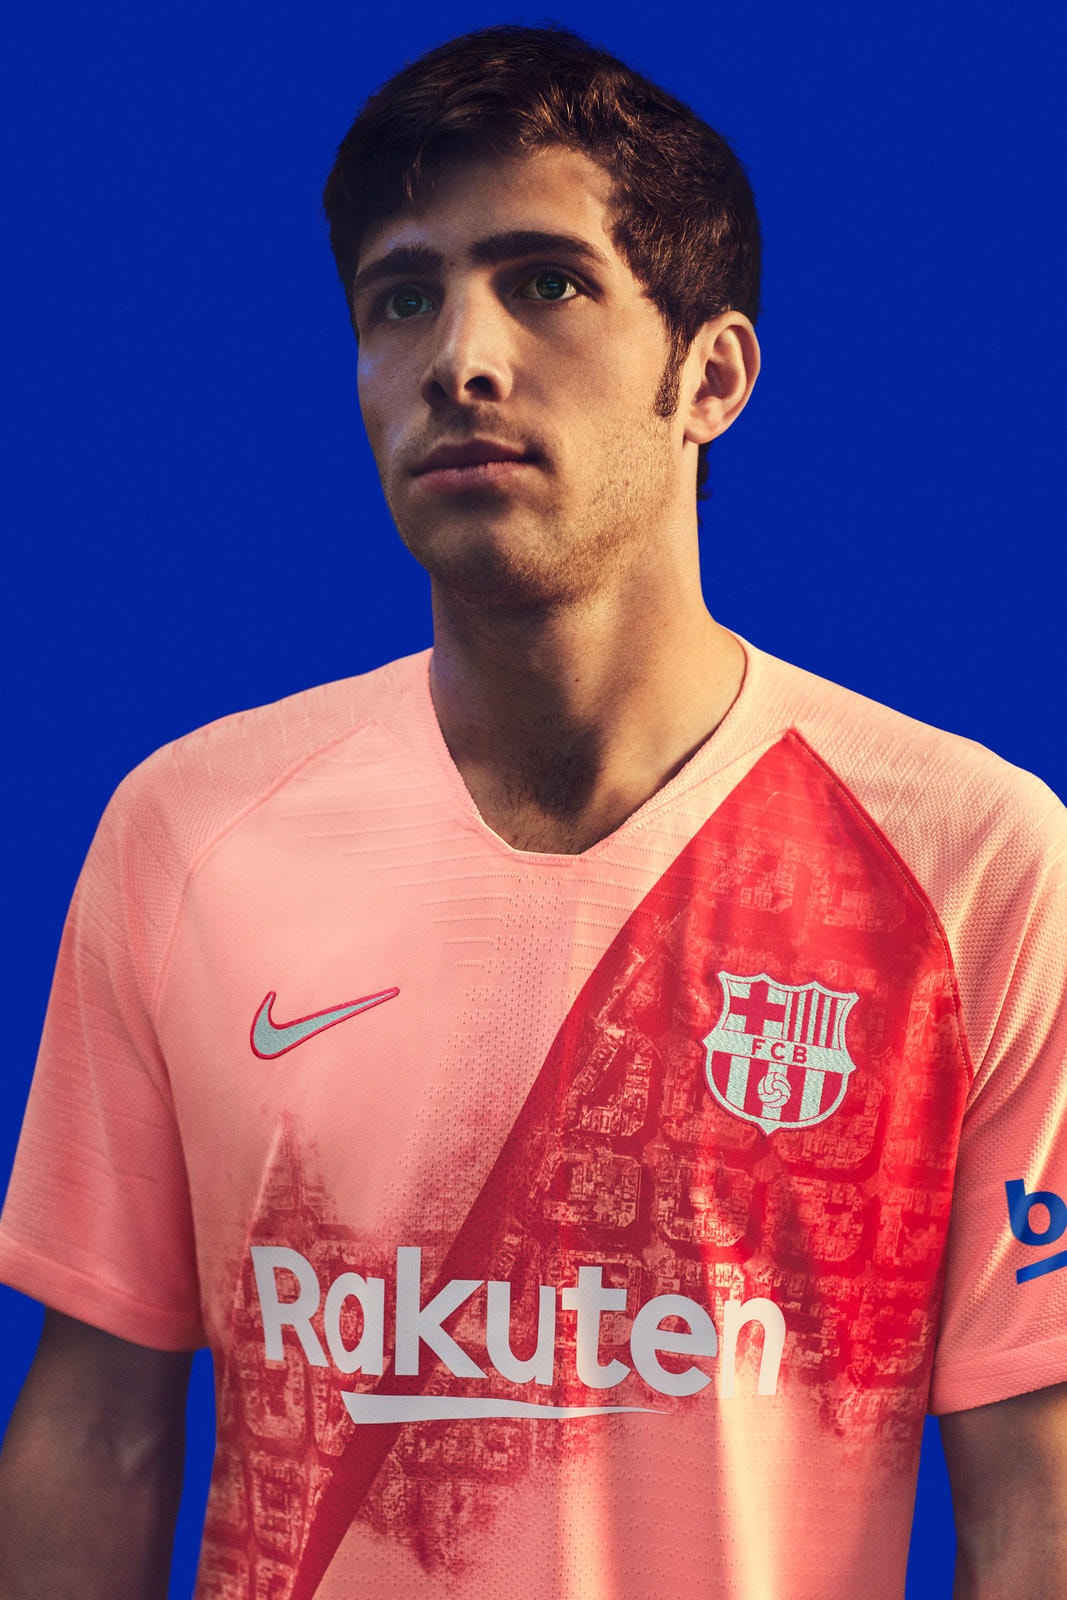 Maillot Foot Barcelone Third 2018 2019